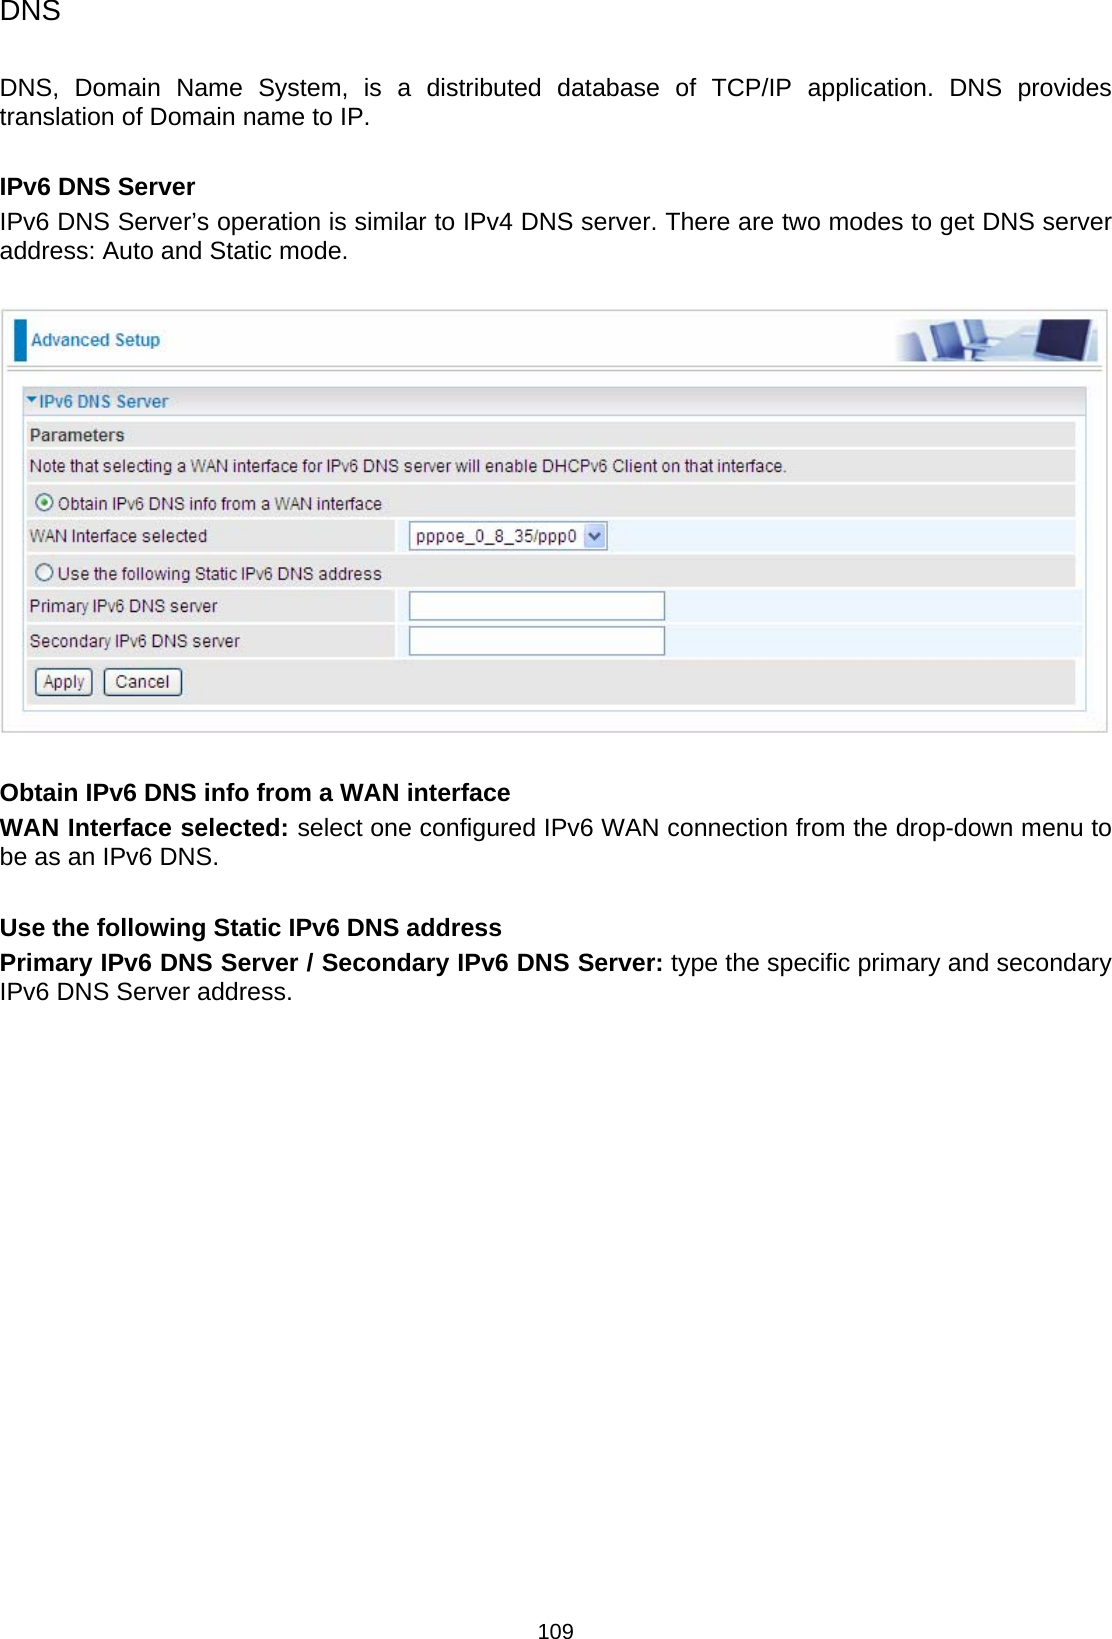  109 DNS  DNS, Domain Name System, is a distributed database of TCP/IP application. DNS provides translation of Domain name to IP.   IPv6 DNS Server IPv6 DNS Server’s operation is similar to IPv4 DNS server. There are two modes to get DNS server address: Auto and Static mode.    Obtain IPv6 DNS info from a WAN interface WAN Interface selected: select one configured IPv6 WAN connection from the drop-down menu to be as an IPv6 DNS.   Use the following Static IPv6 DNS address Primary IPv6 DNS Server / Secondary IPv6 DNS Server: type the specific primary and secondary IPv6 DNS Server address.  